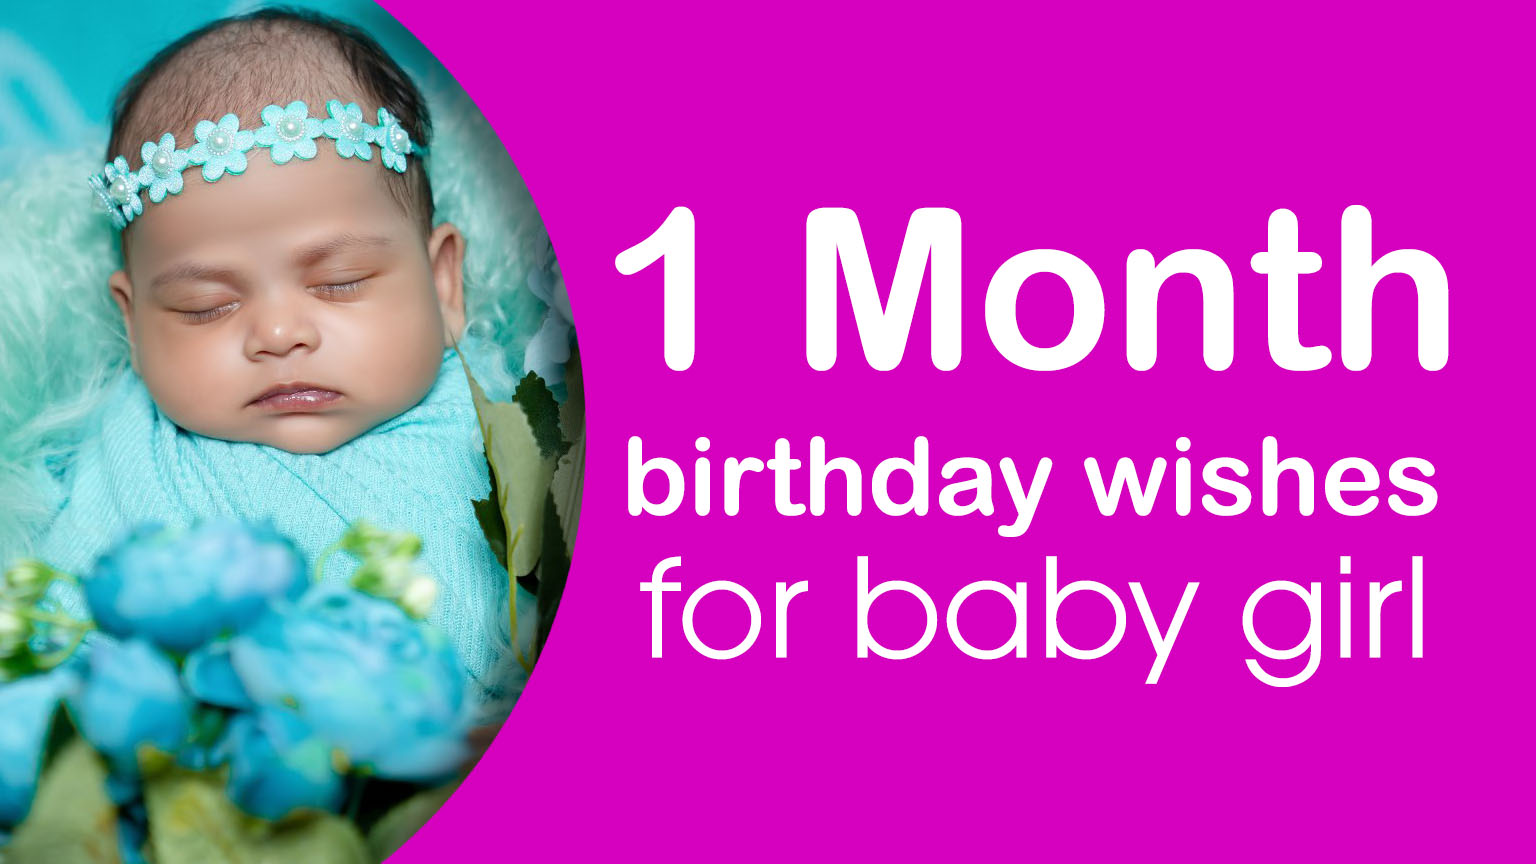 1 month birthday wishes for baby girl